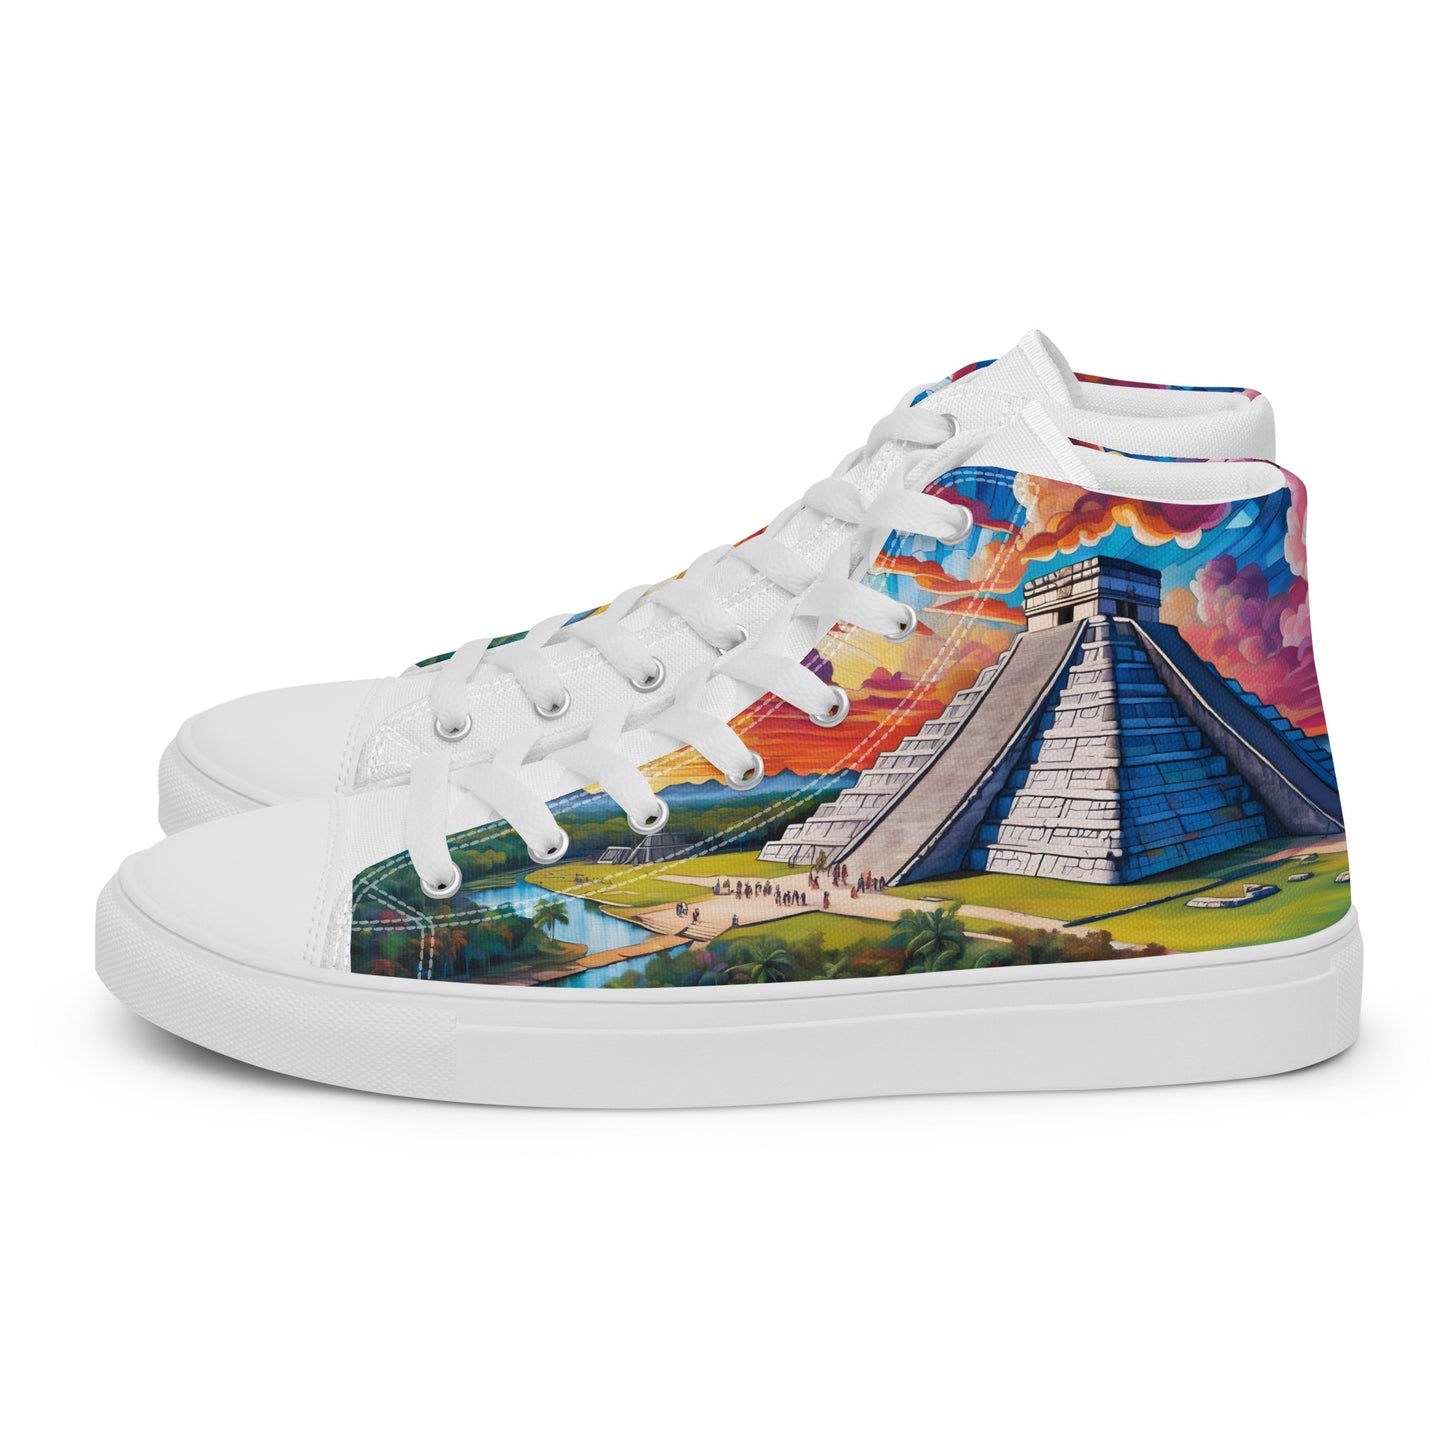 Chichén Itzá - Stained glass - Men - White - High top shoes